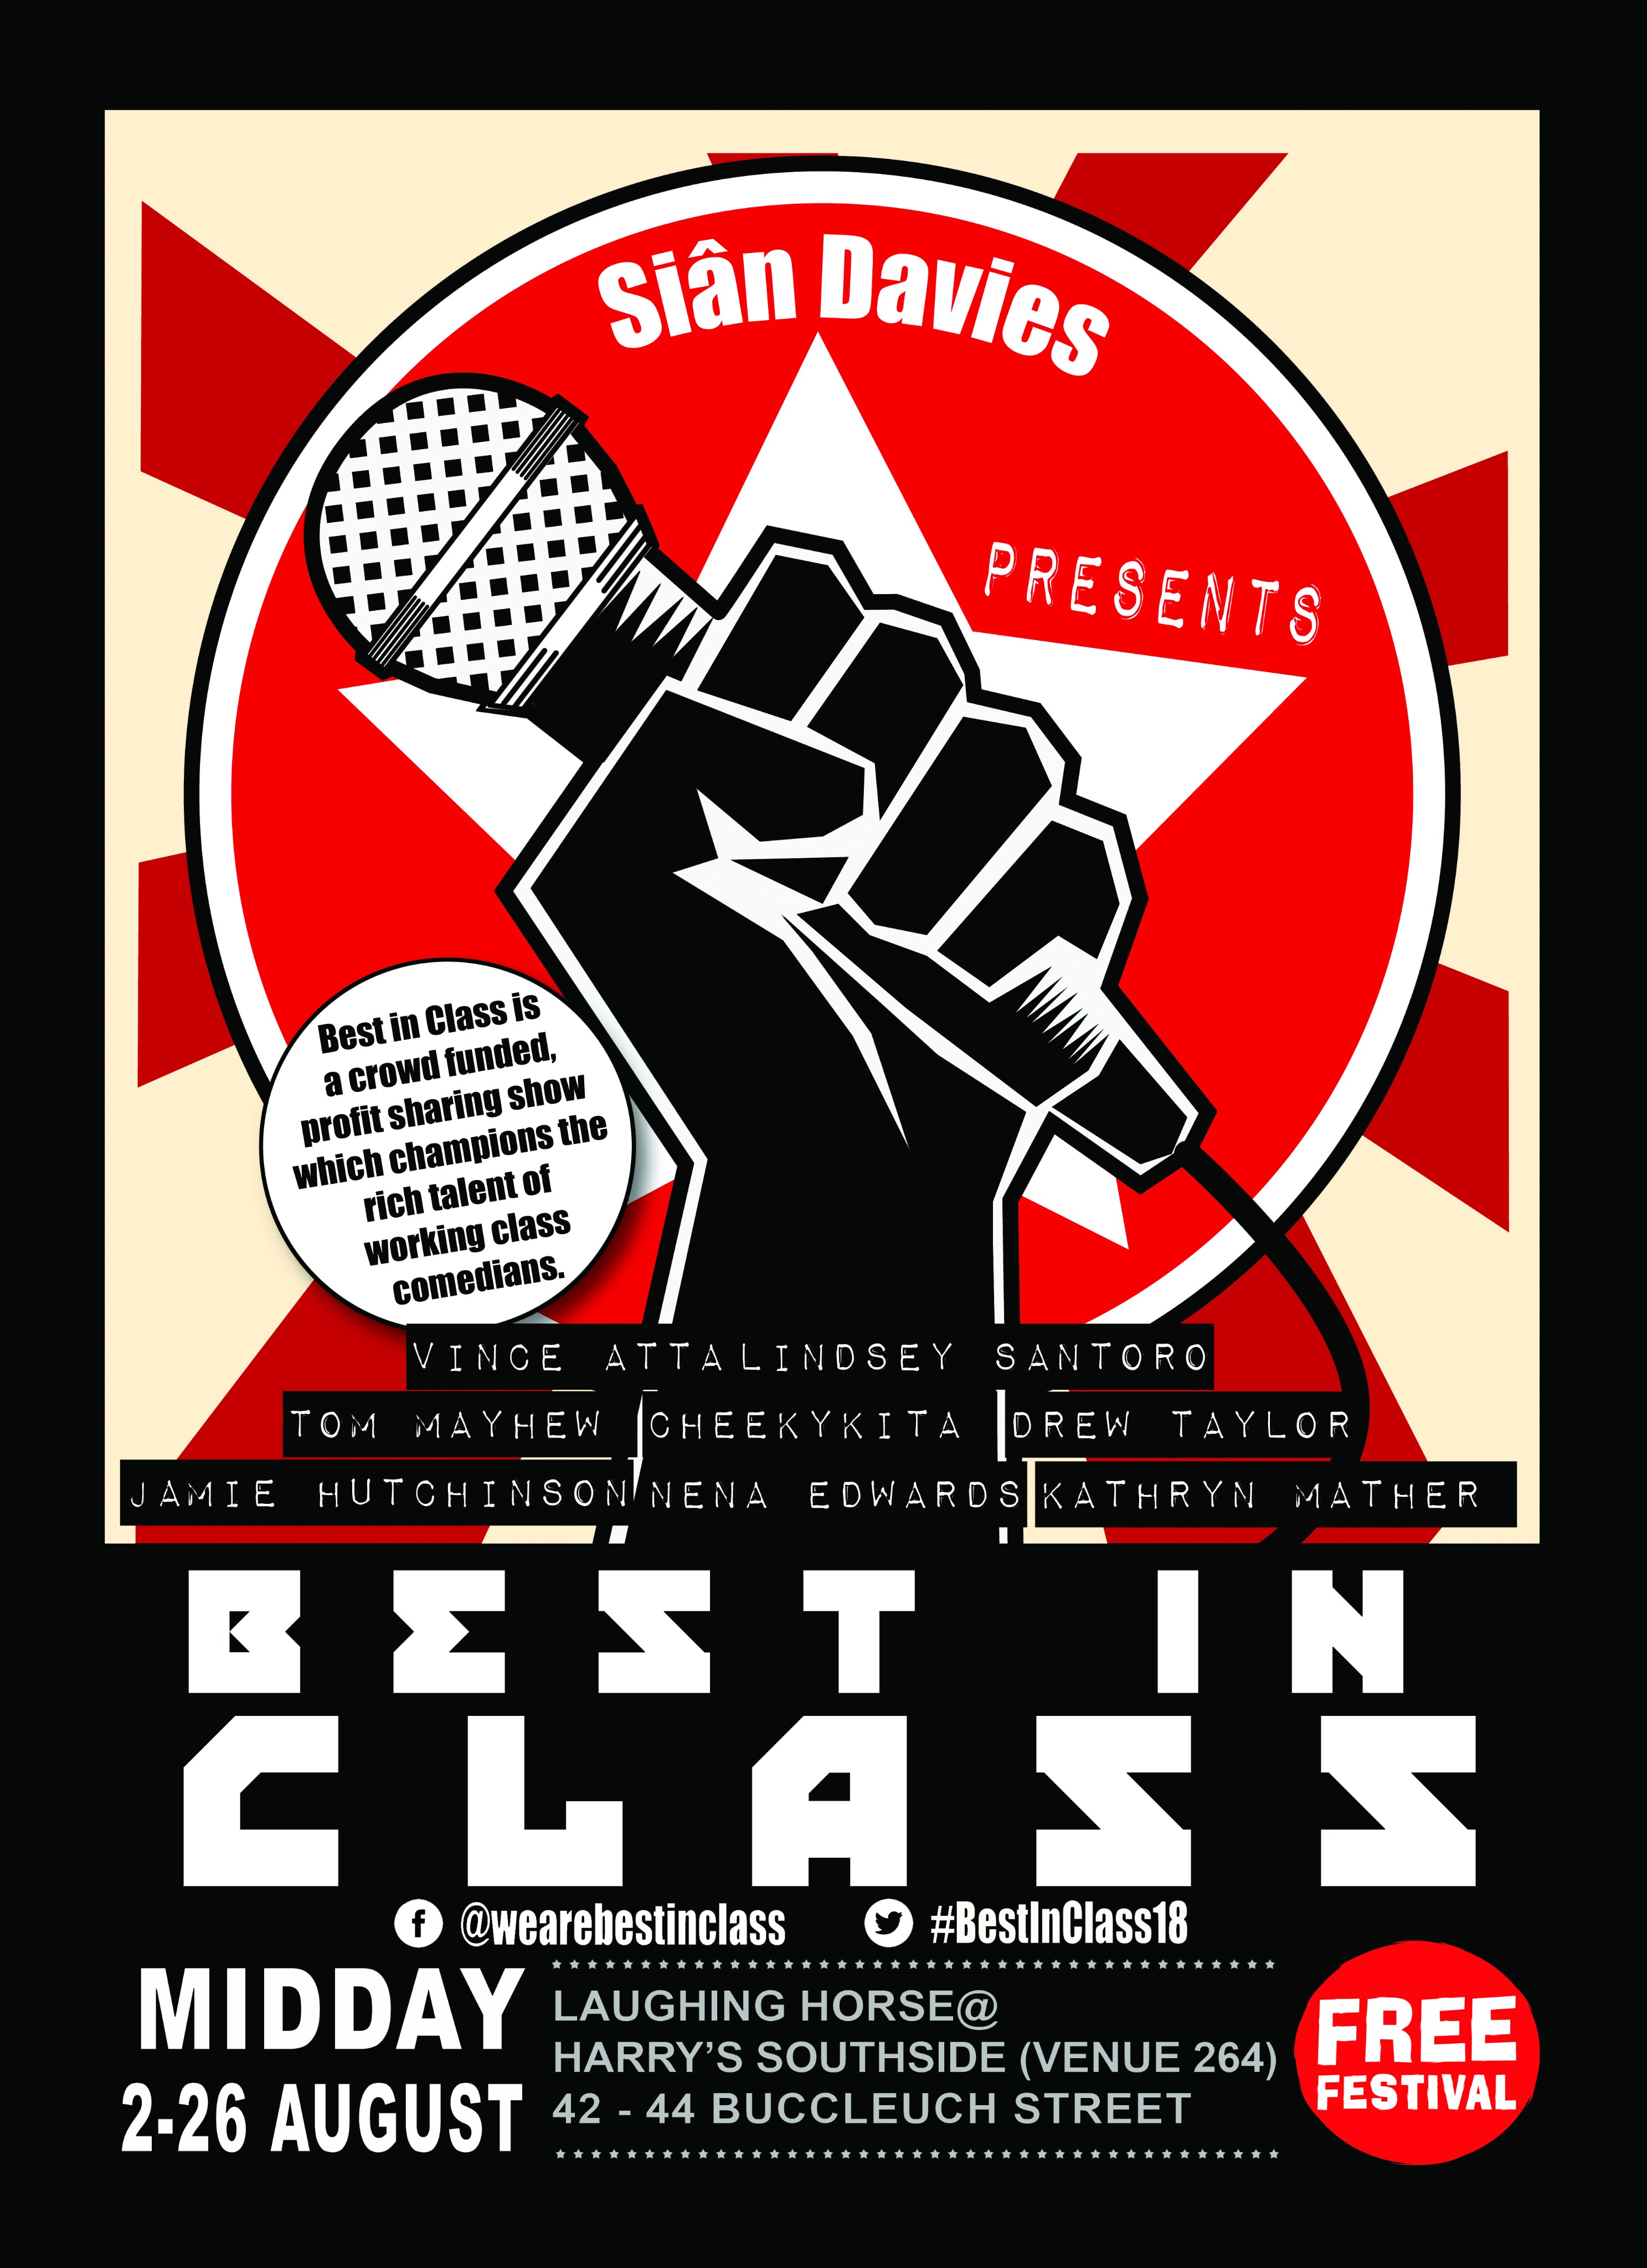 The poster for Best In Class / Free Festival